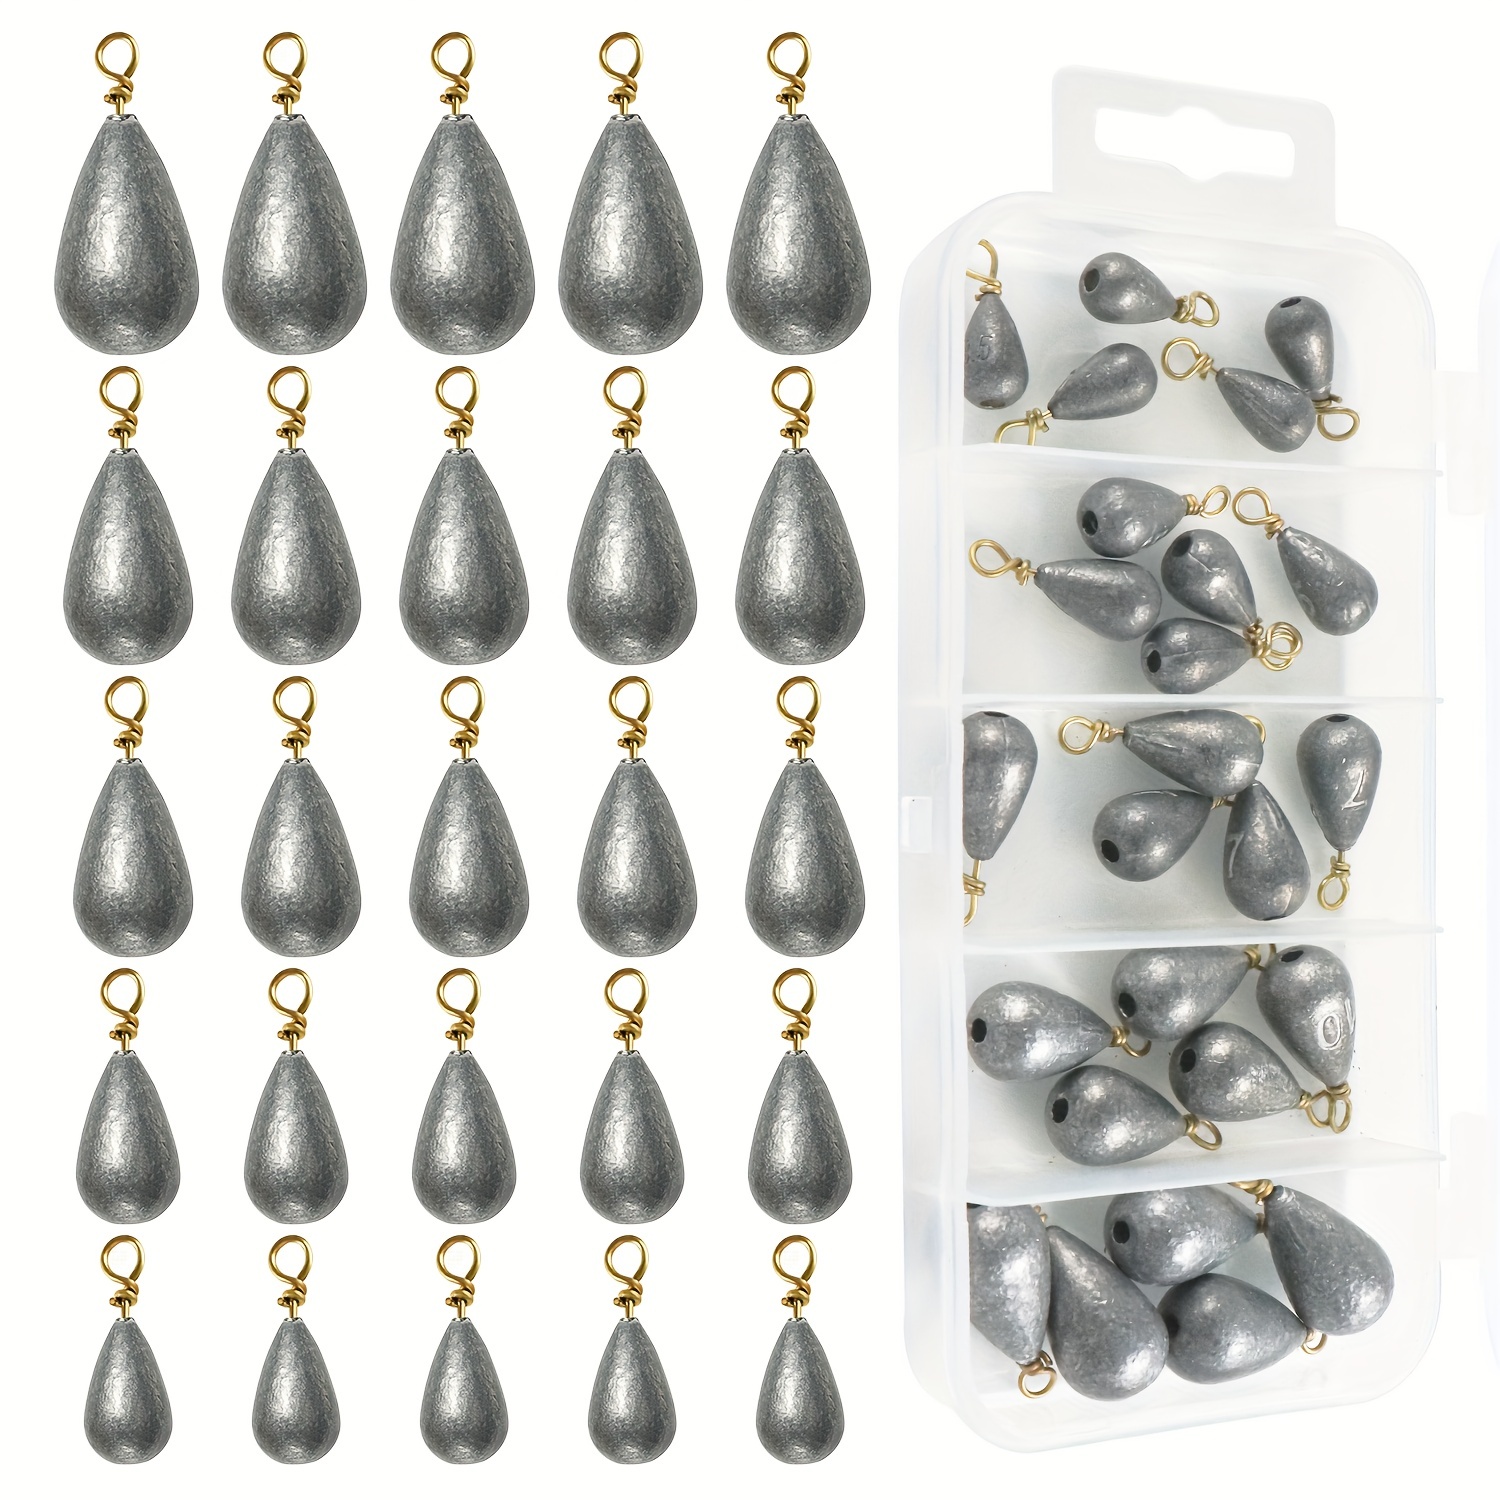  Bell Sinkers Fishing Weights Kit, 54pcs Bass Casting